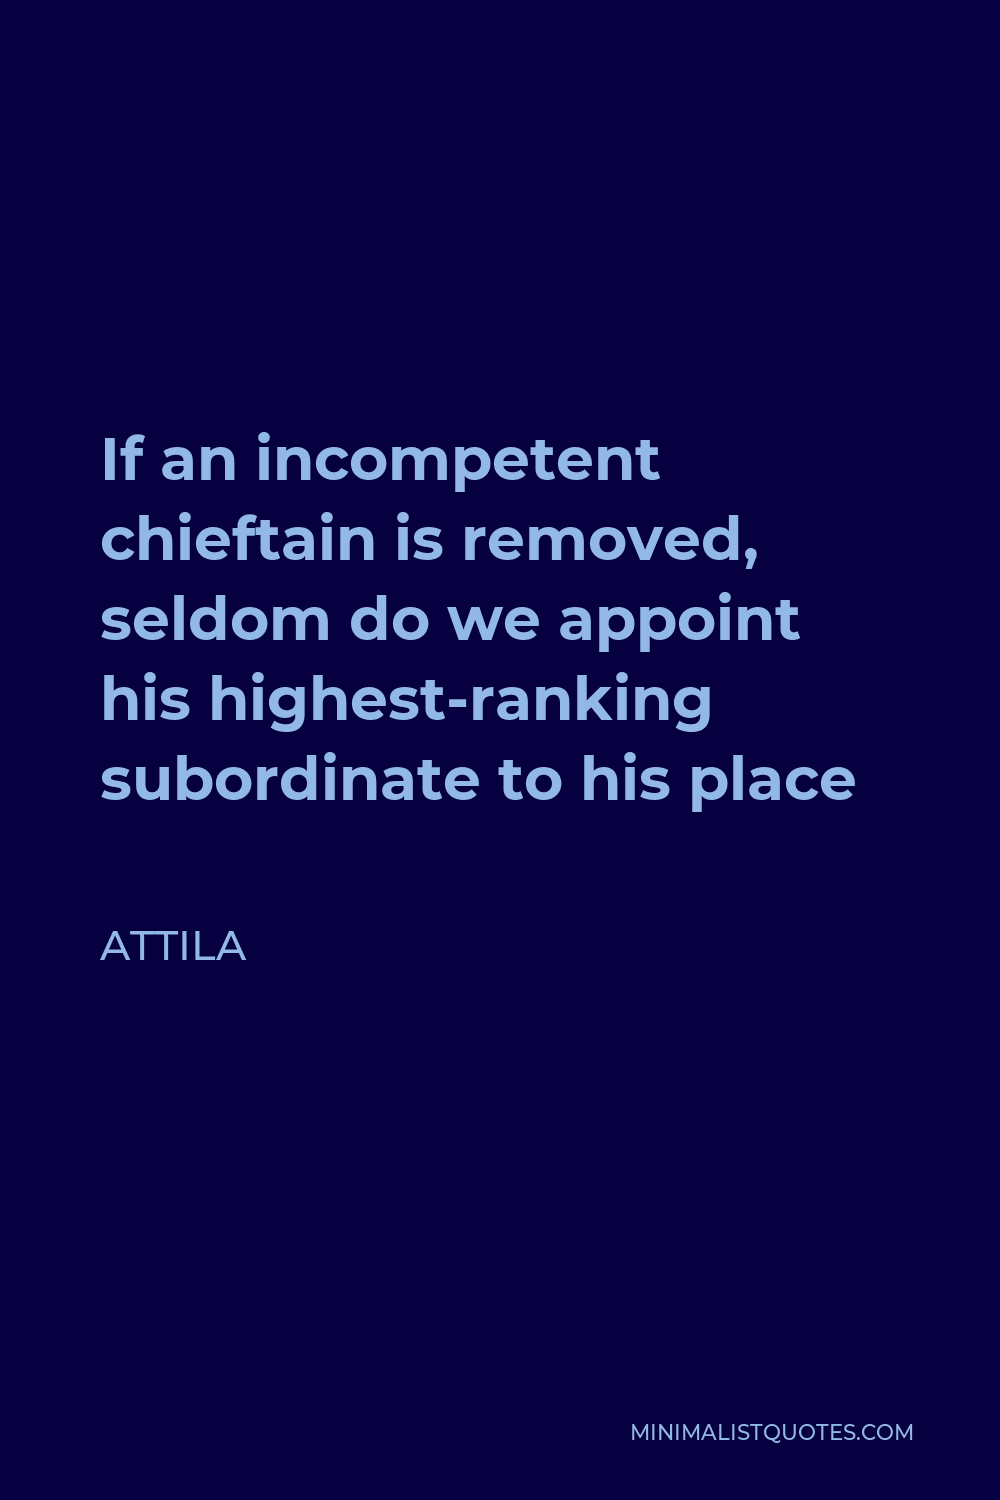 Attila Quote - If an incompetent chieftain is removed, seldom do we appoint his highest-ranking subordinate to his place